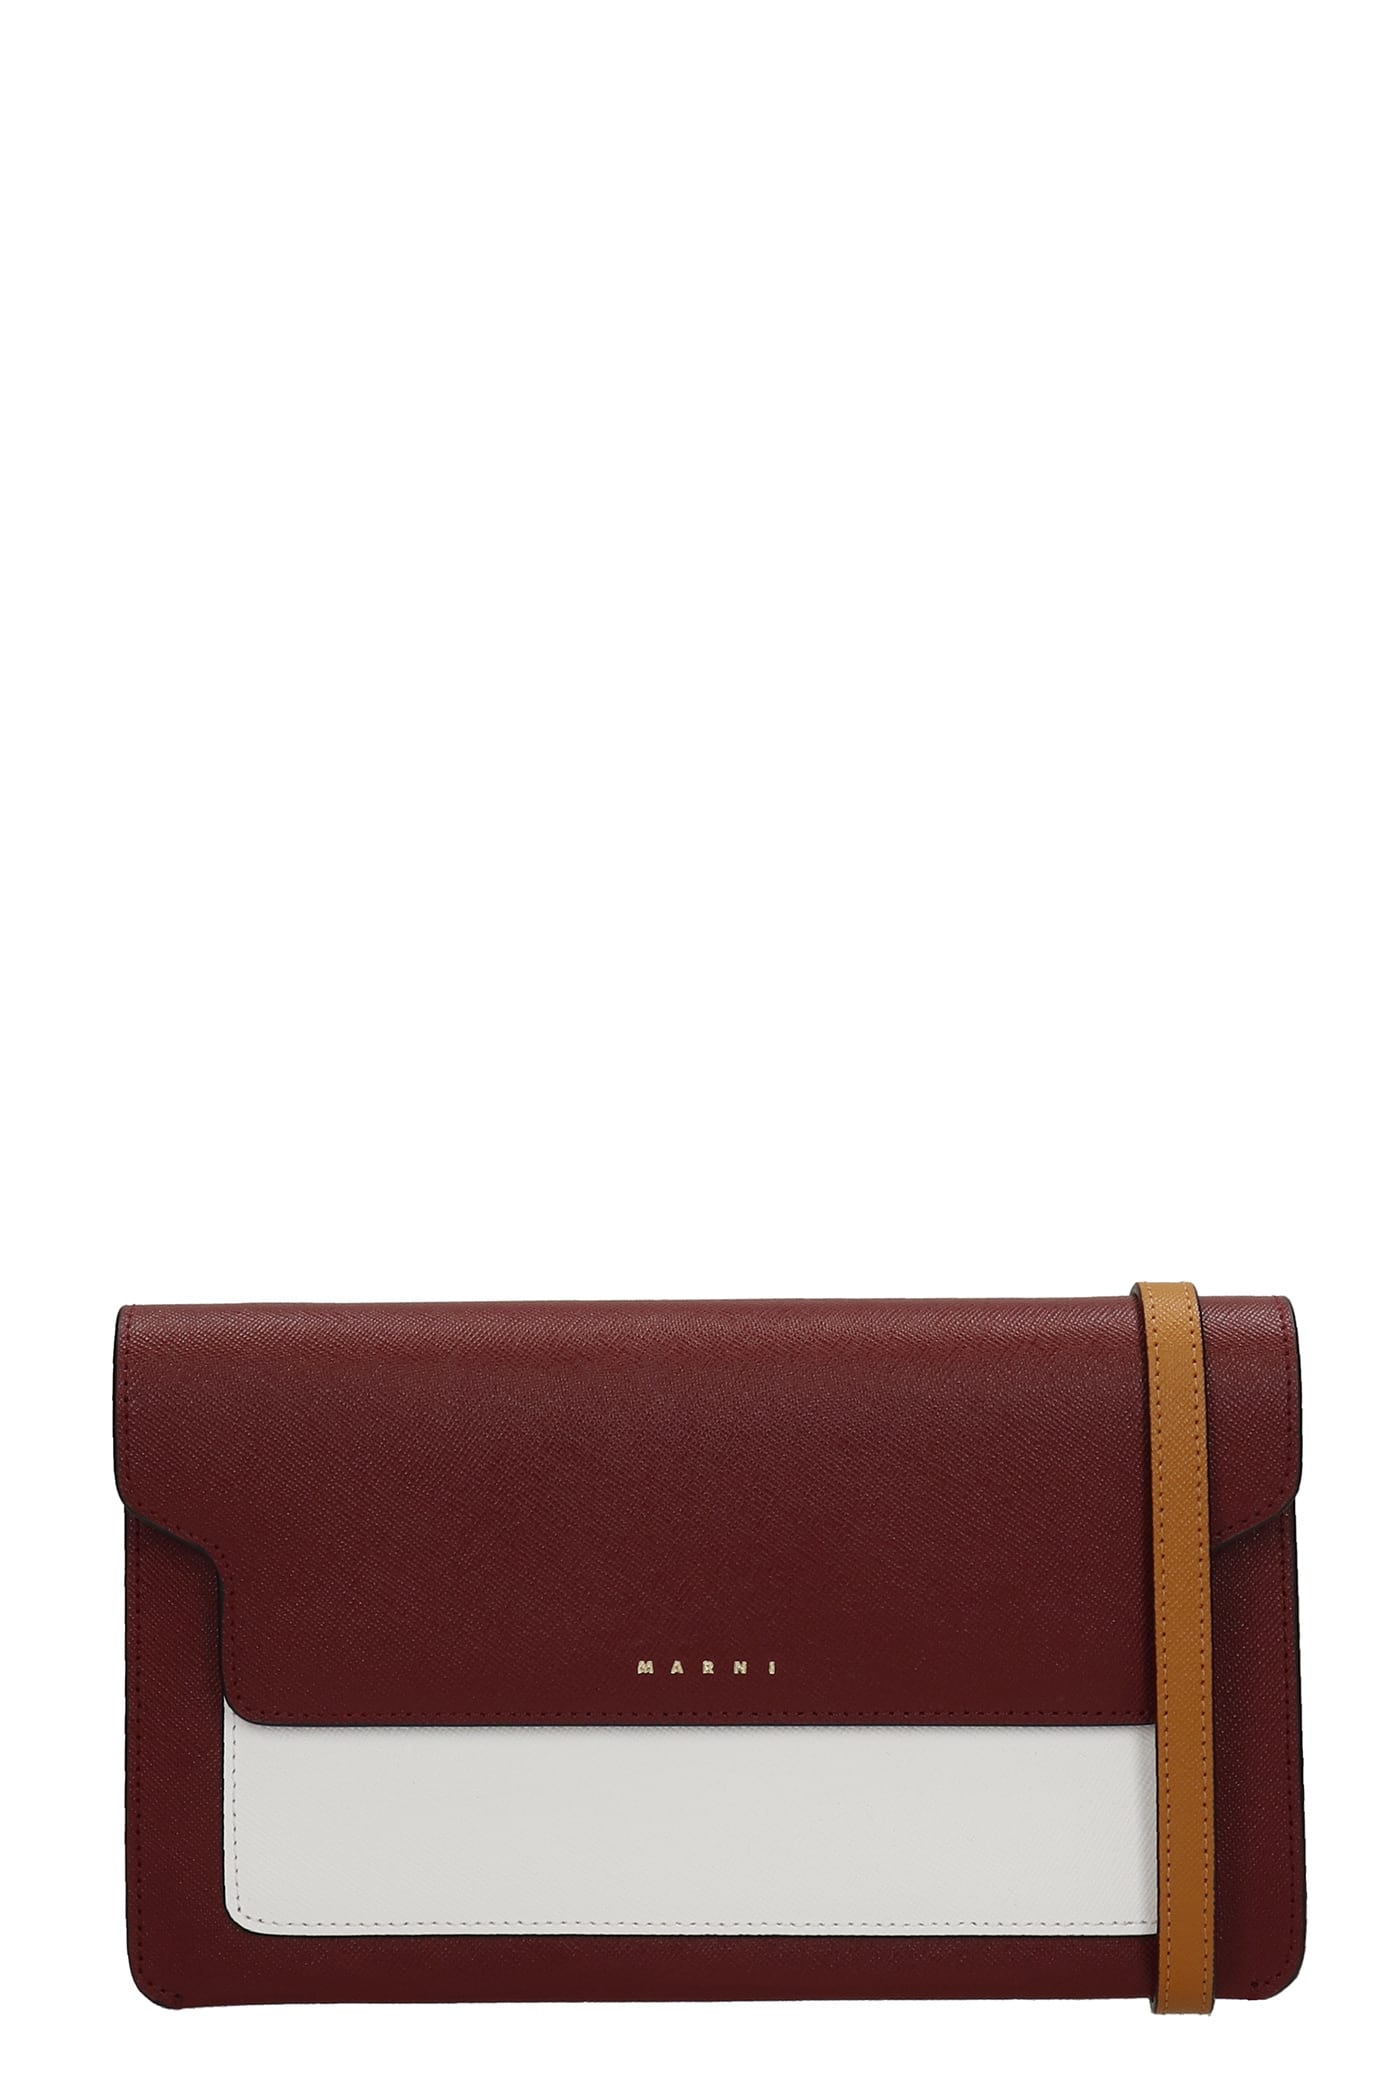 Marni Clutch In Bordeaux Leather